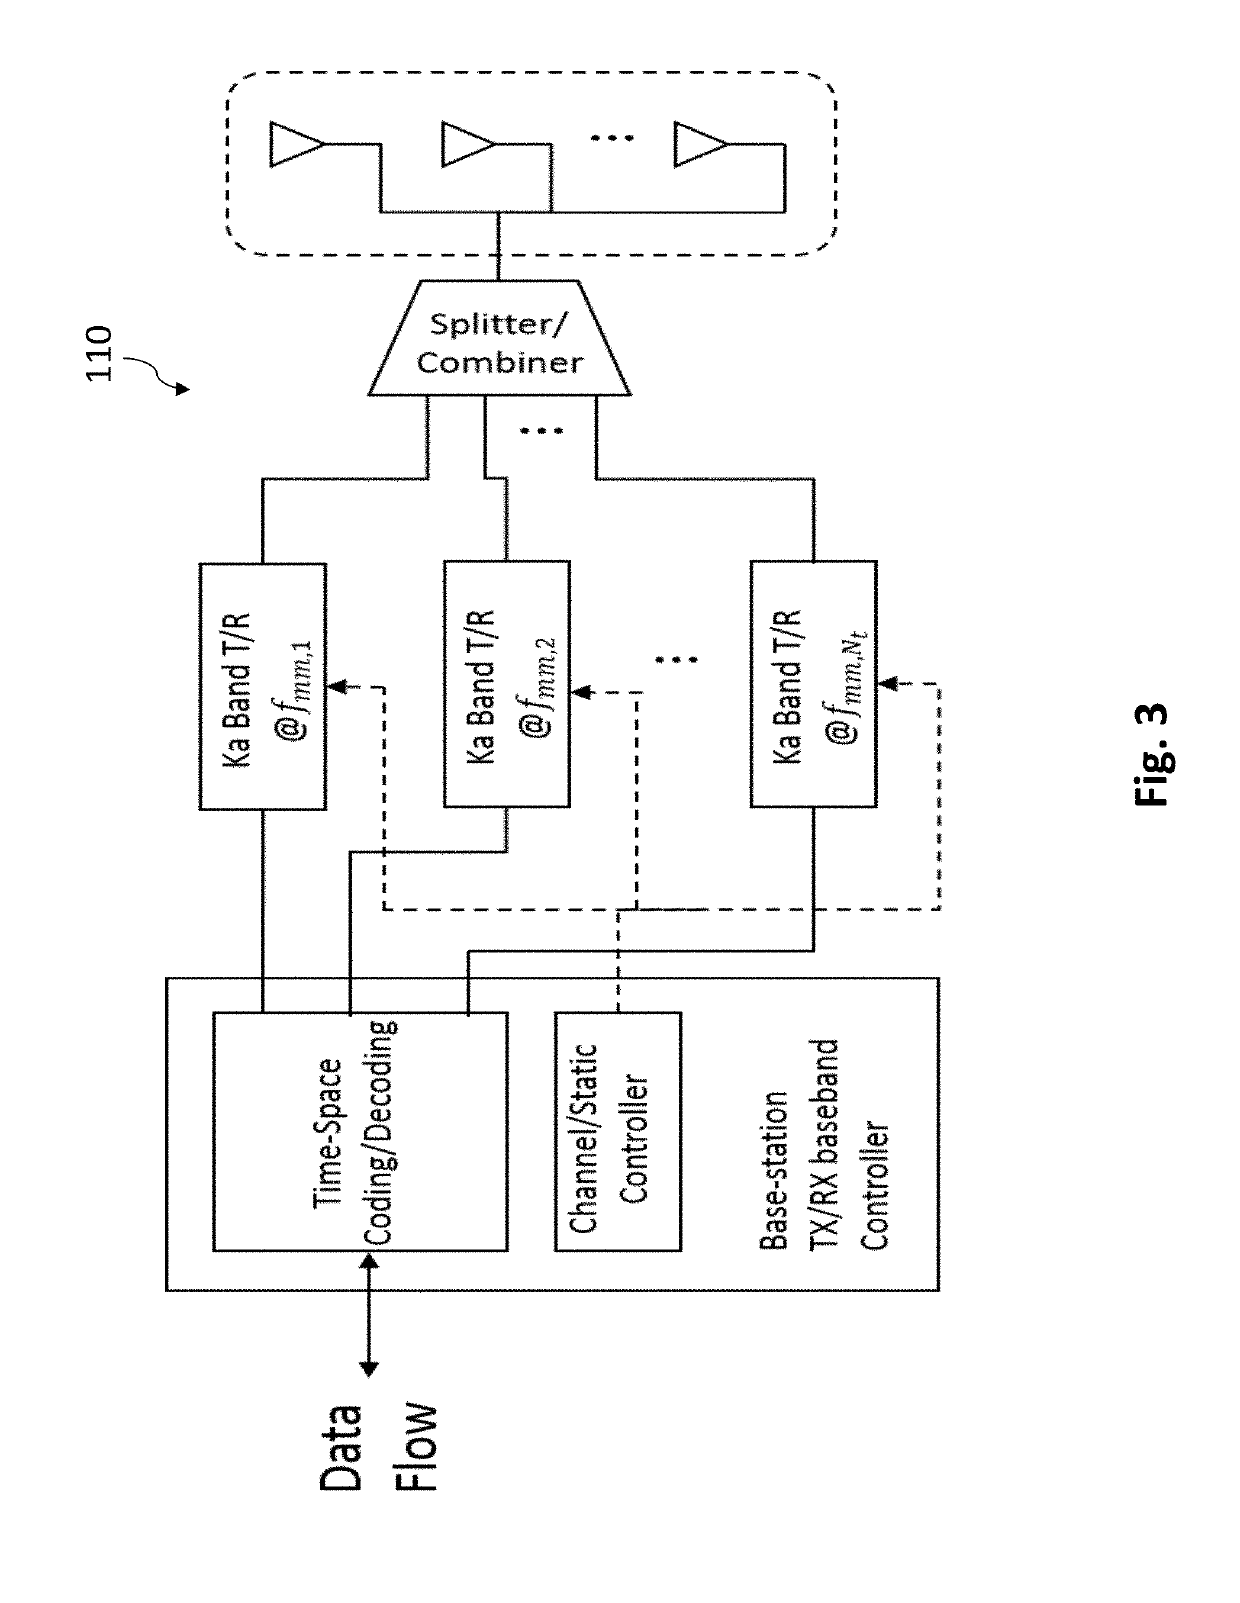 Method and System For Millimeter Wave (mmWave) to Microwave Multiple-In Multiple-Out (MIMO) Relay